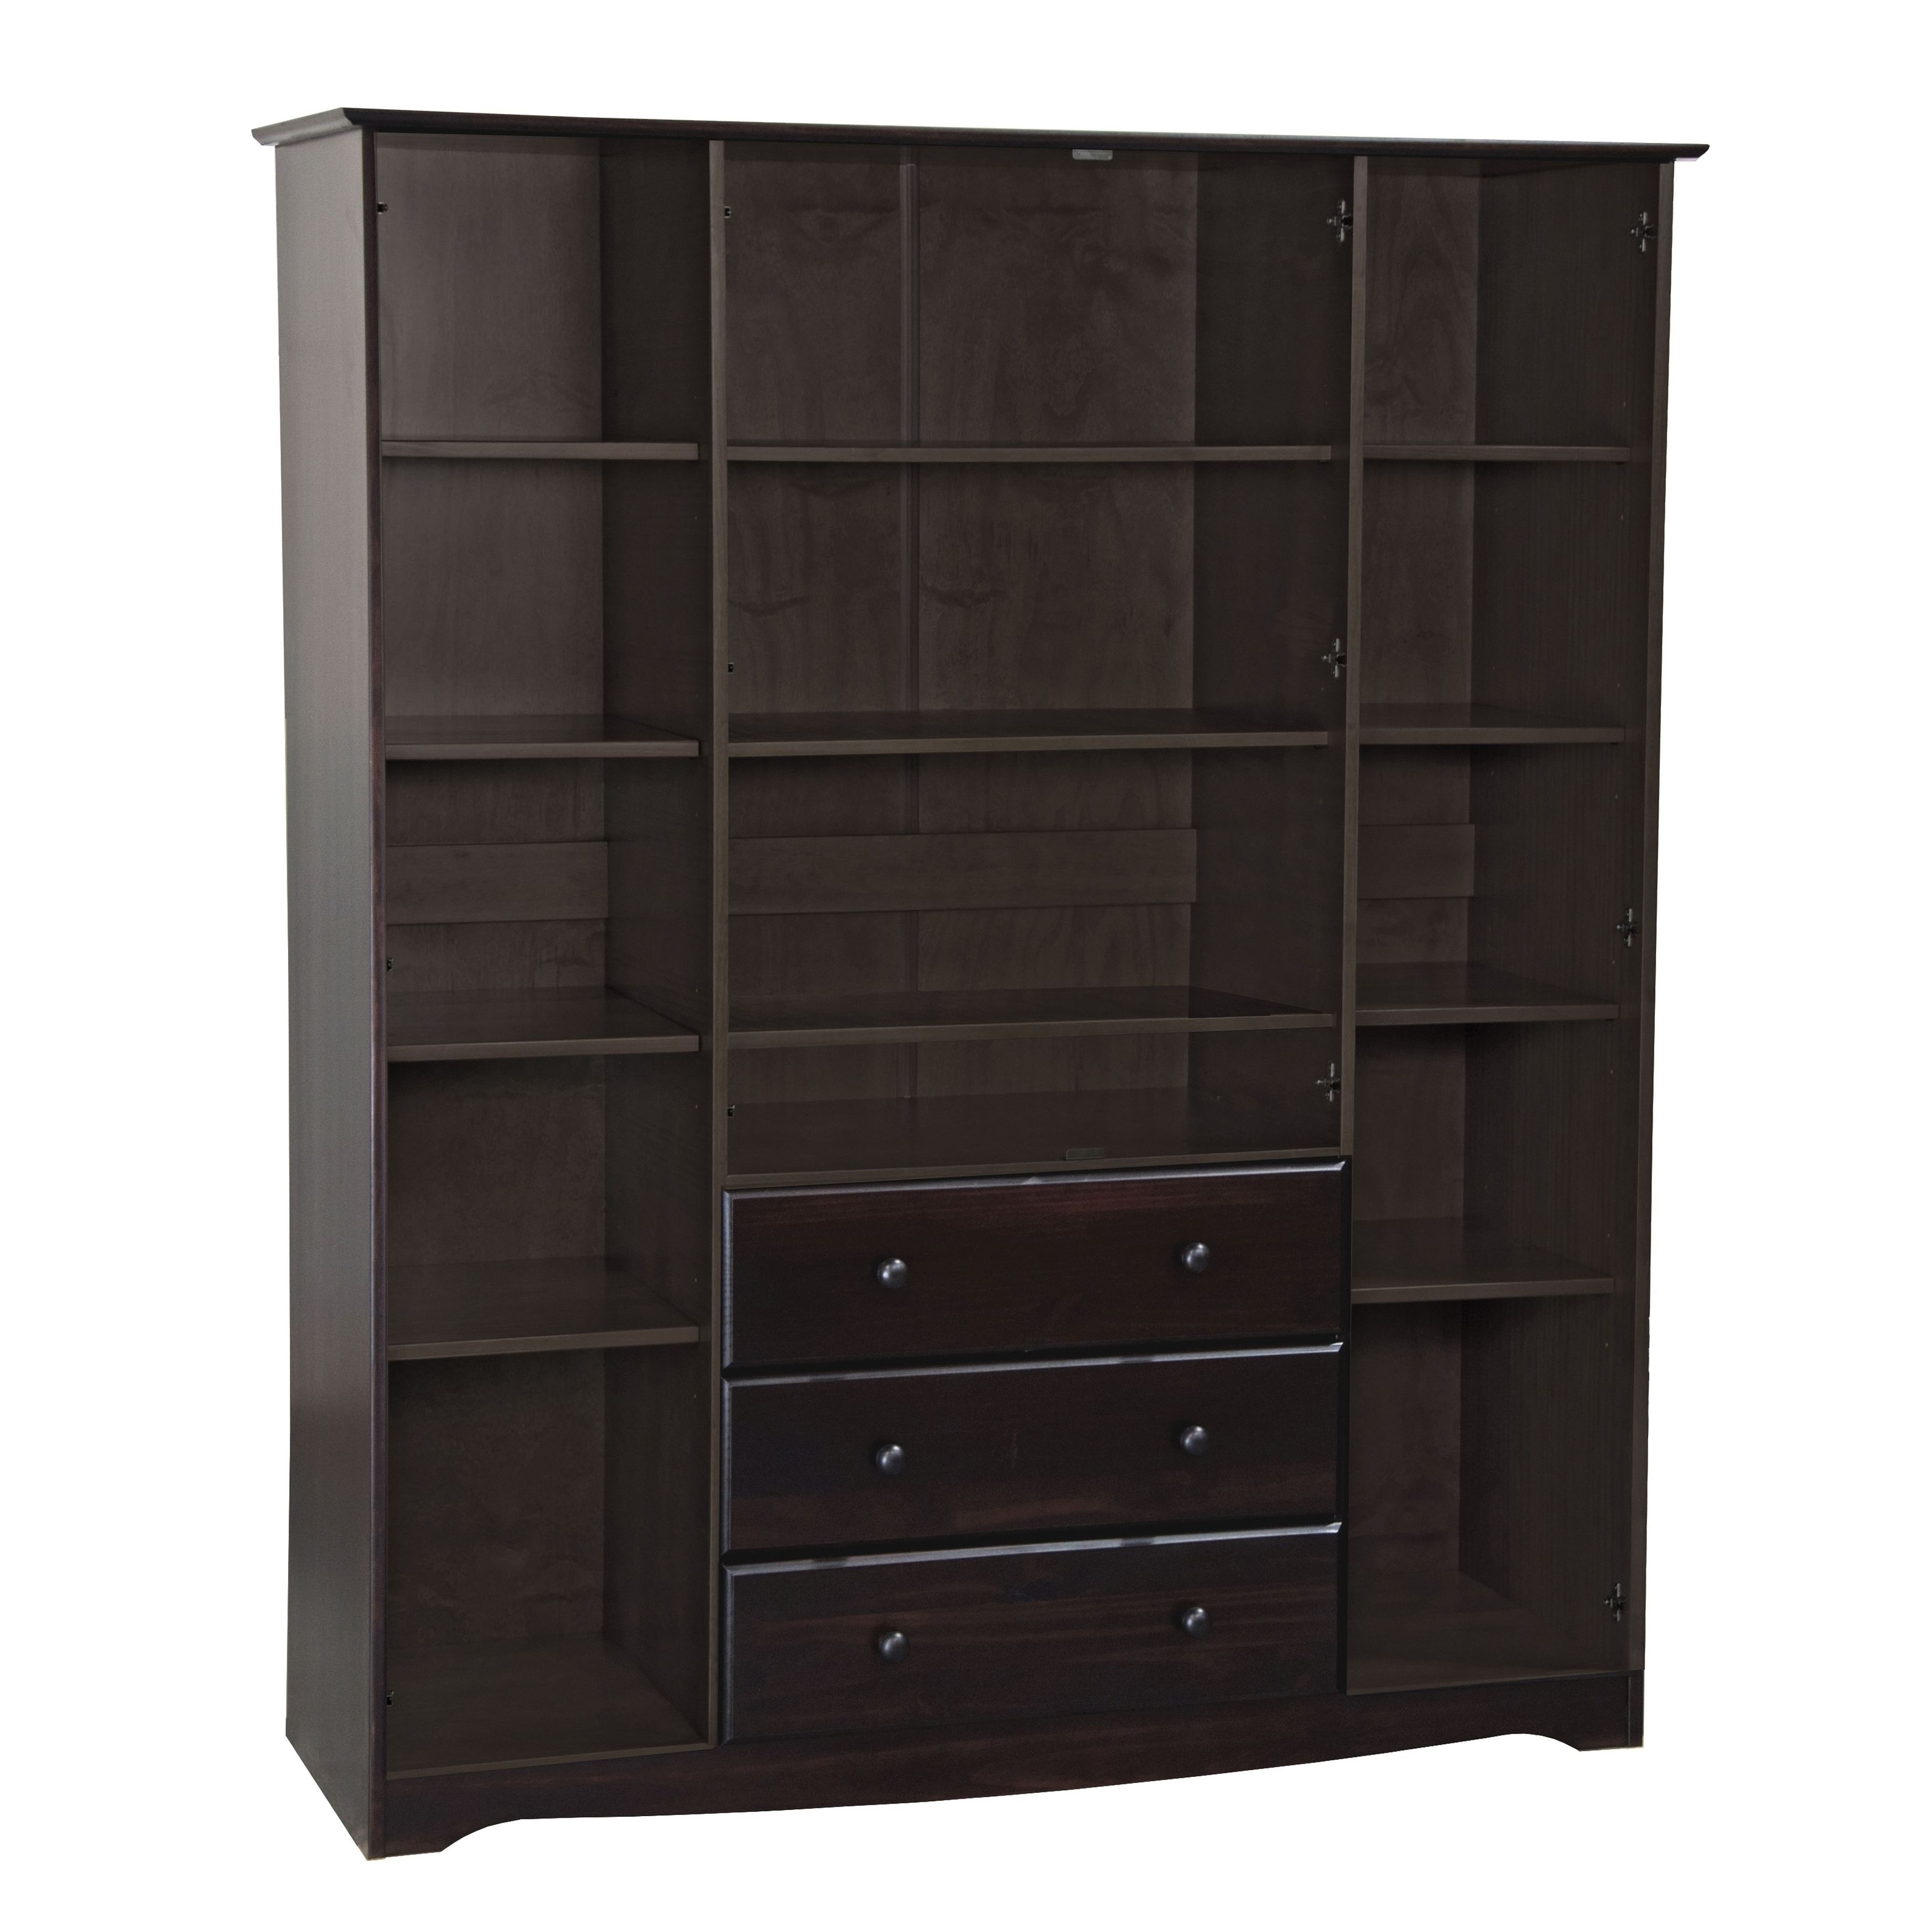 Wicker Armoire Wardrobes Regarding Latest Armoires & Wardrobe Closets For Less (View 10 of 15)